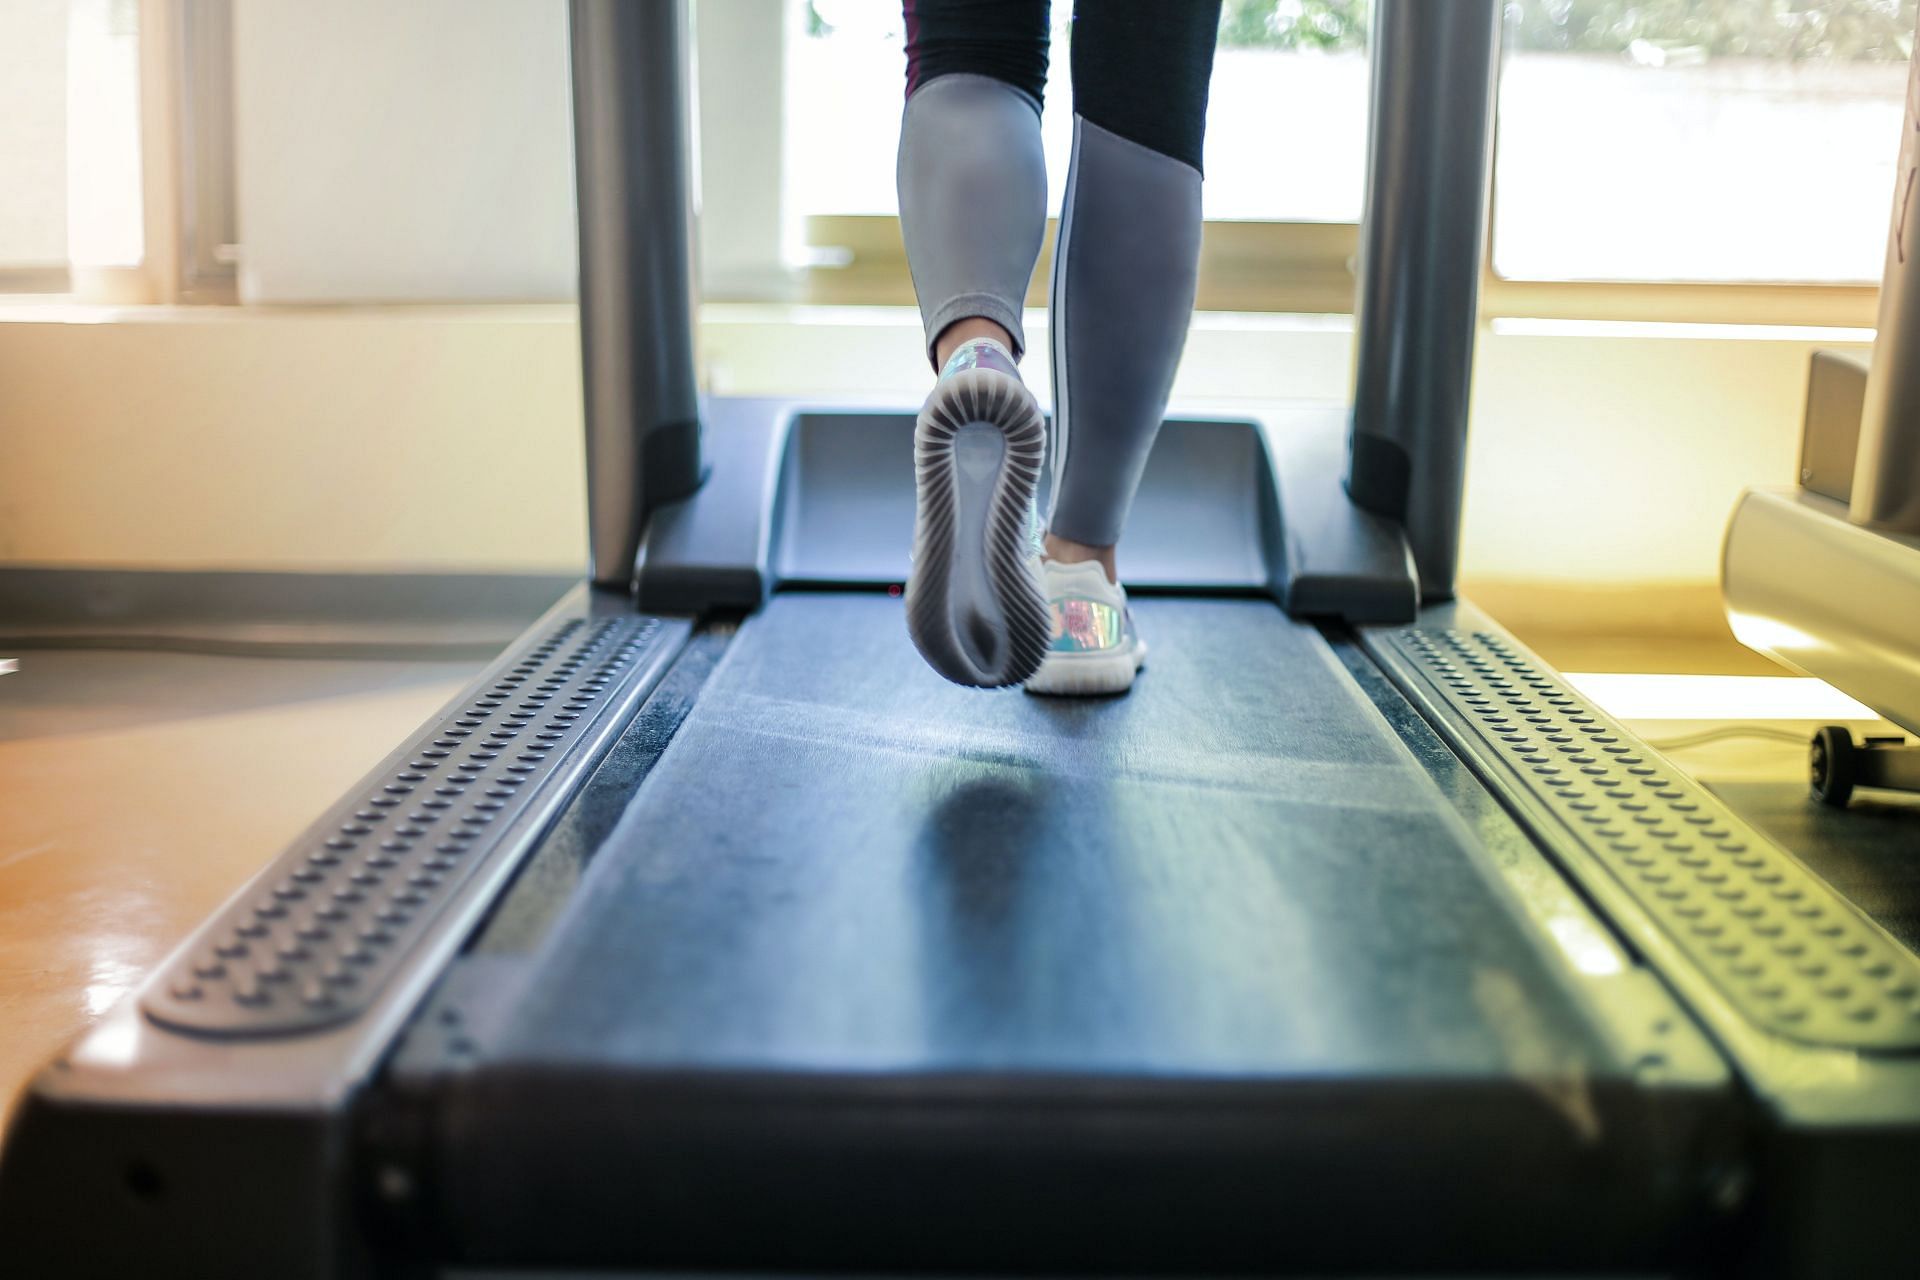 You have control on how fast or slow you would like to run on treadmill. (Image by Andrea Piacquadio / Pexels)